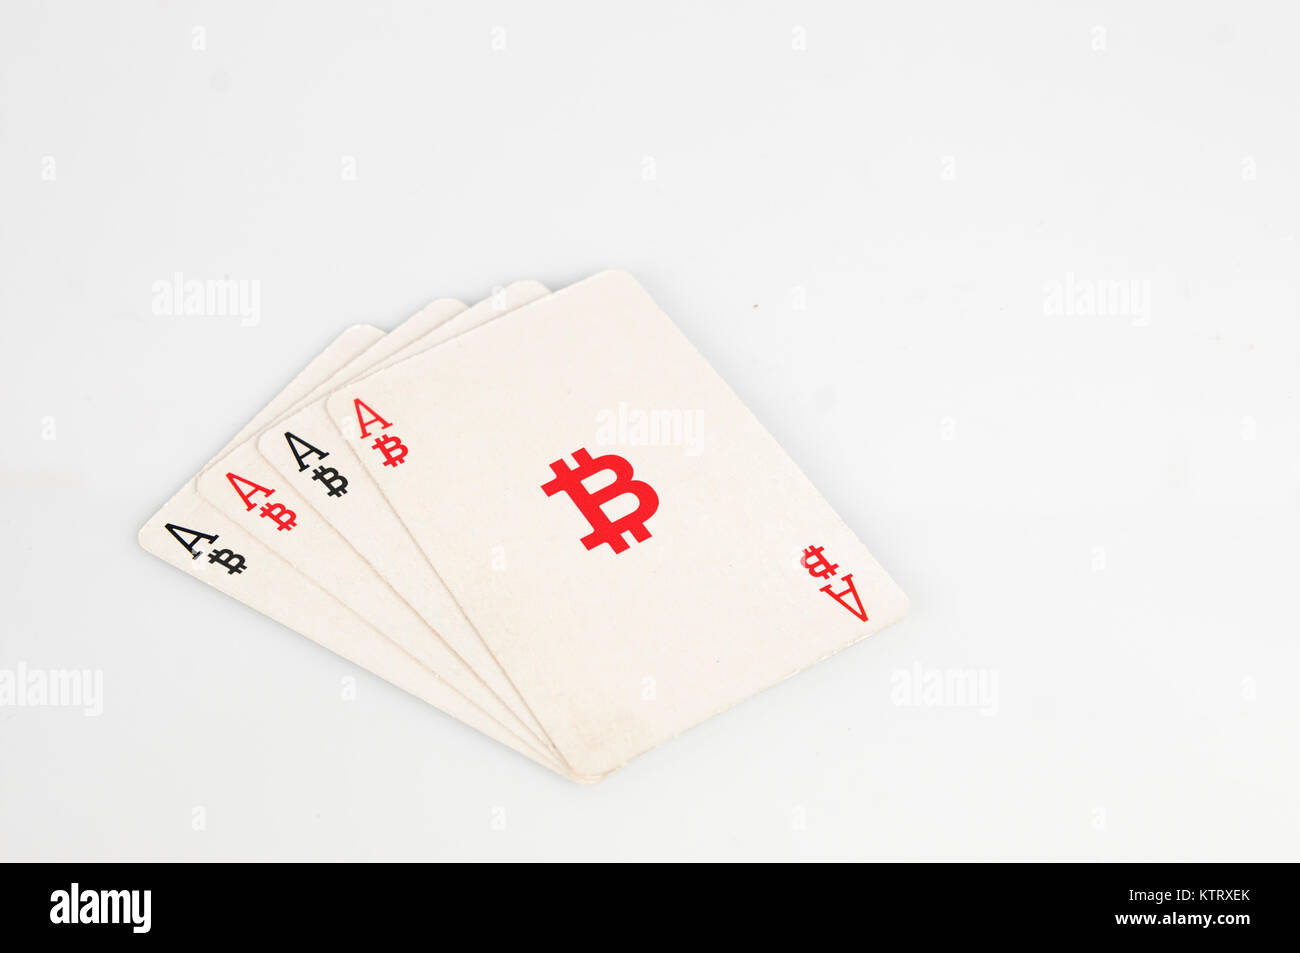 Bitcoin concept: four of a kind of bitcoin playing cards Stock Photo